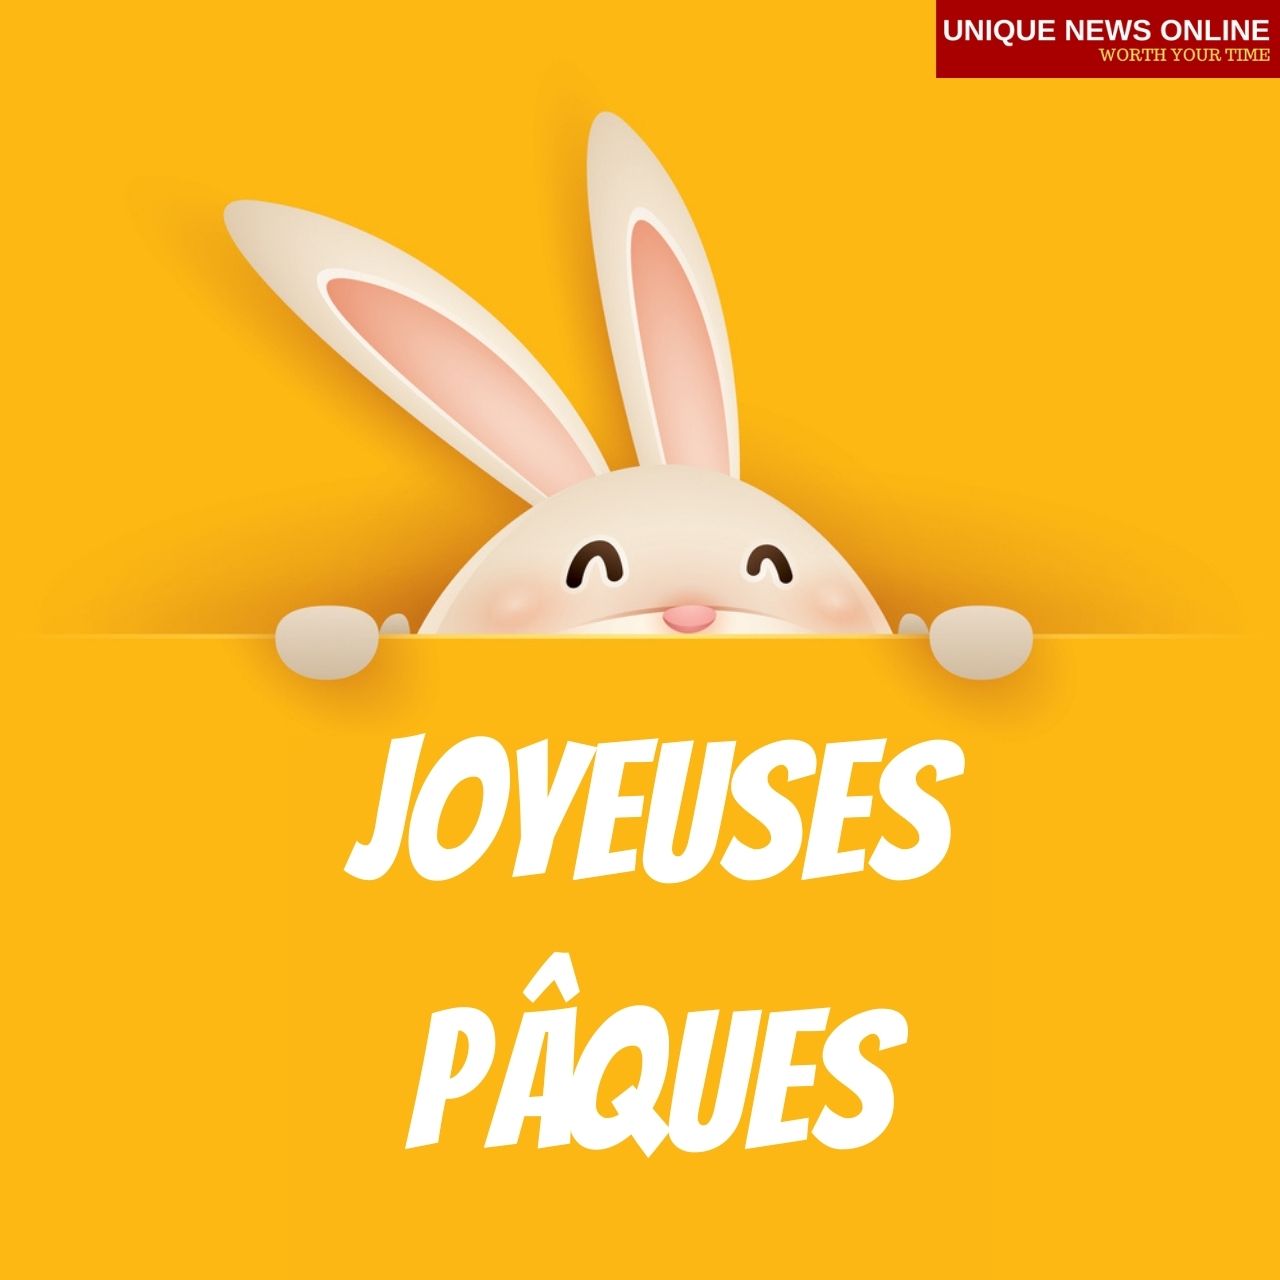 Happy Easter Sunday 2021 Wishes in French, Quotes, Images, Messages, and  Quotes to Share on Joyeuses Pâques